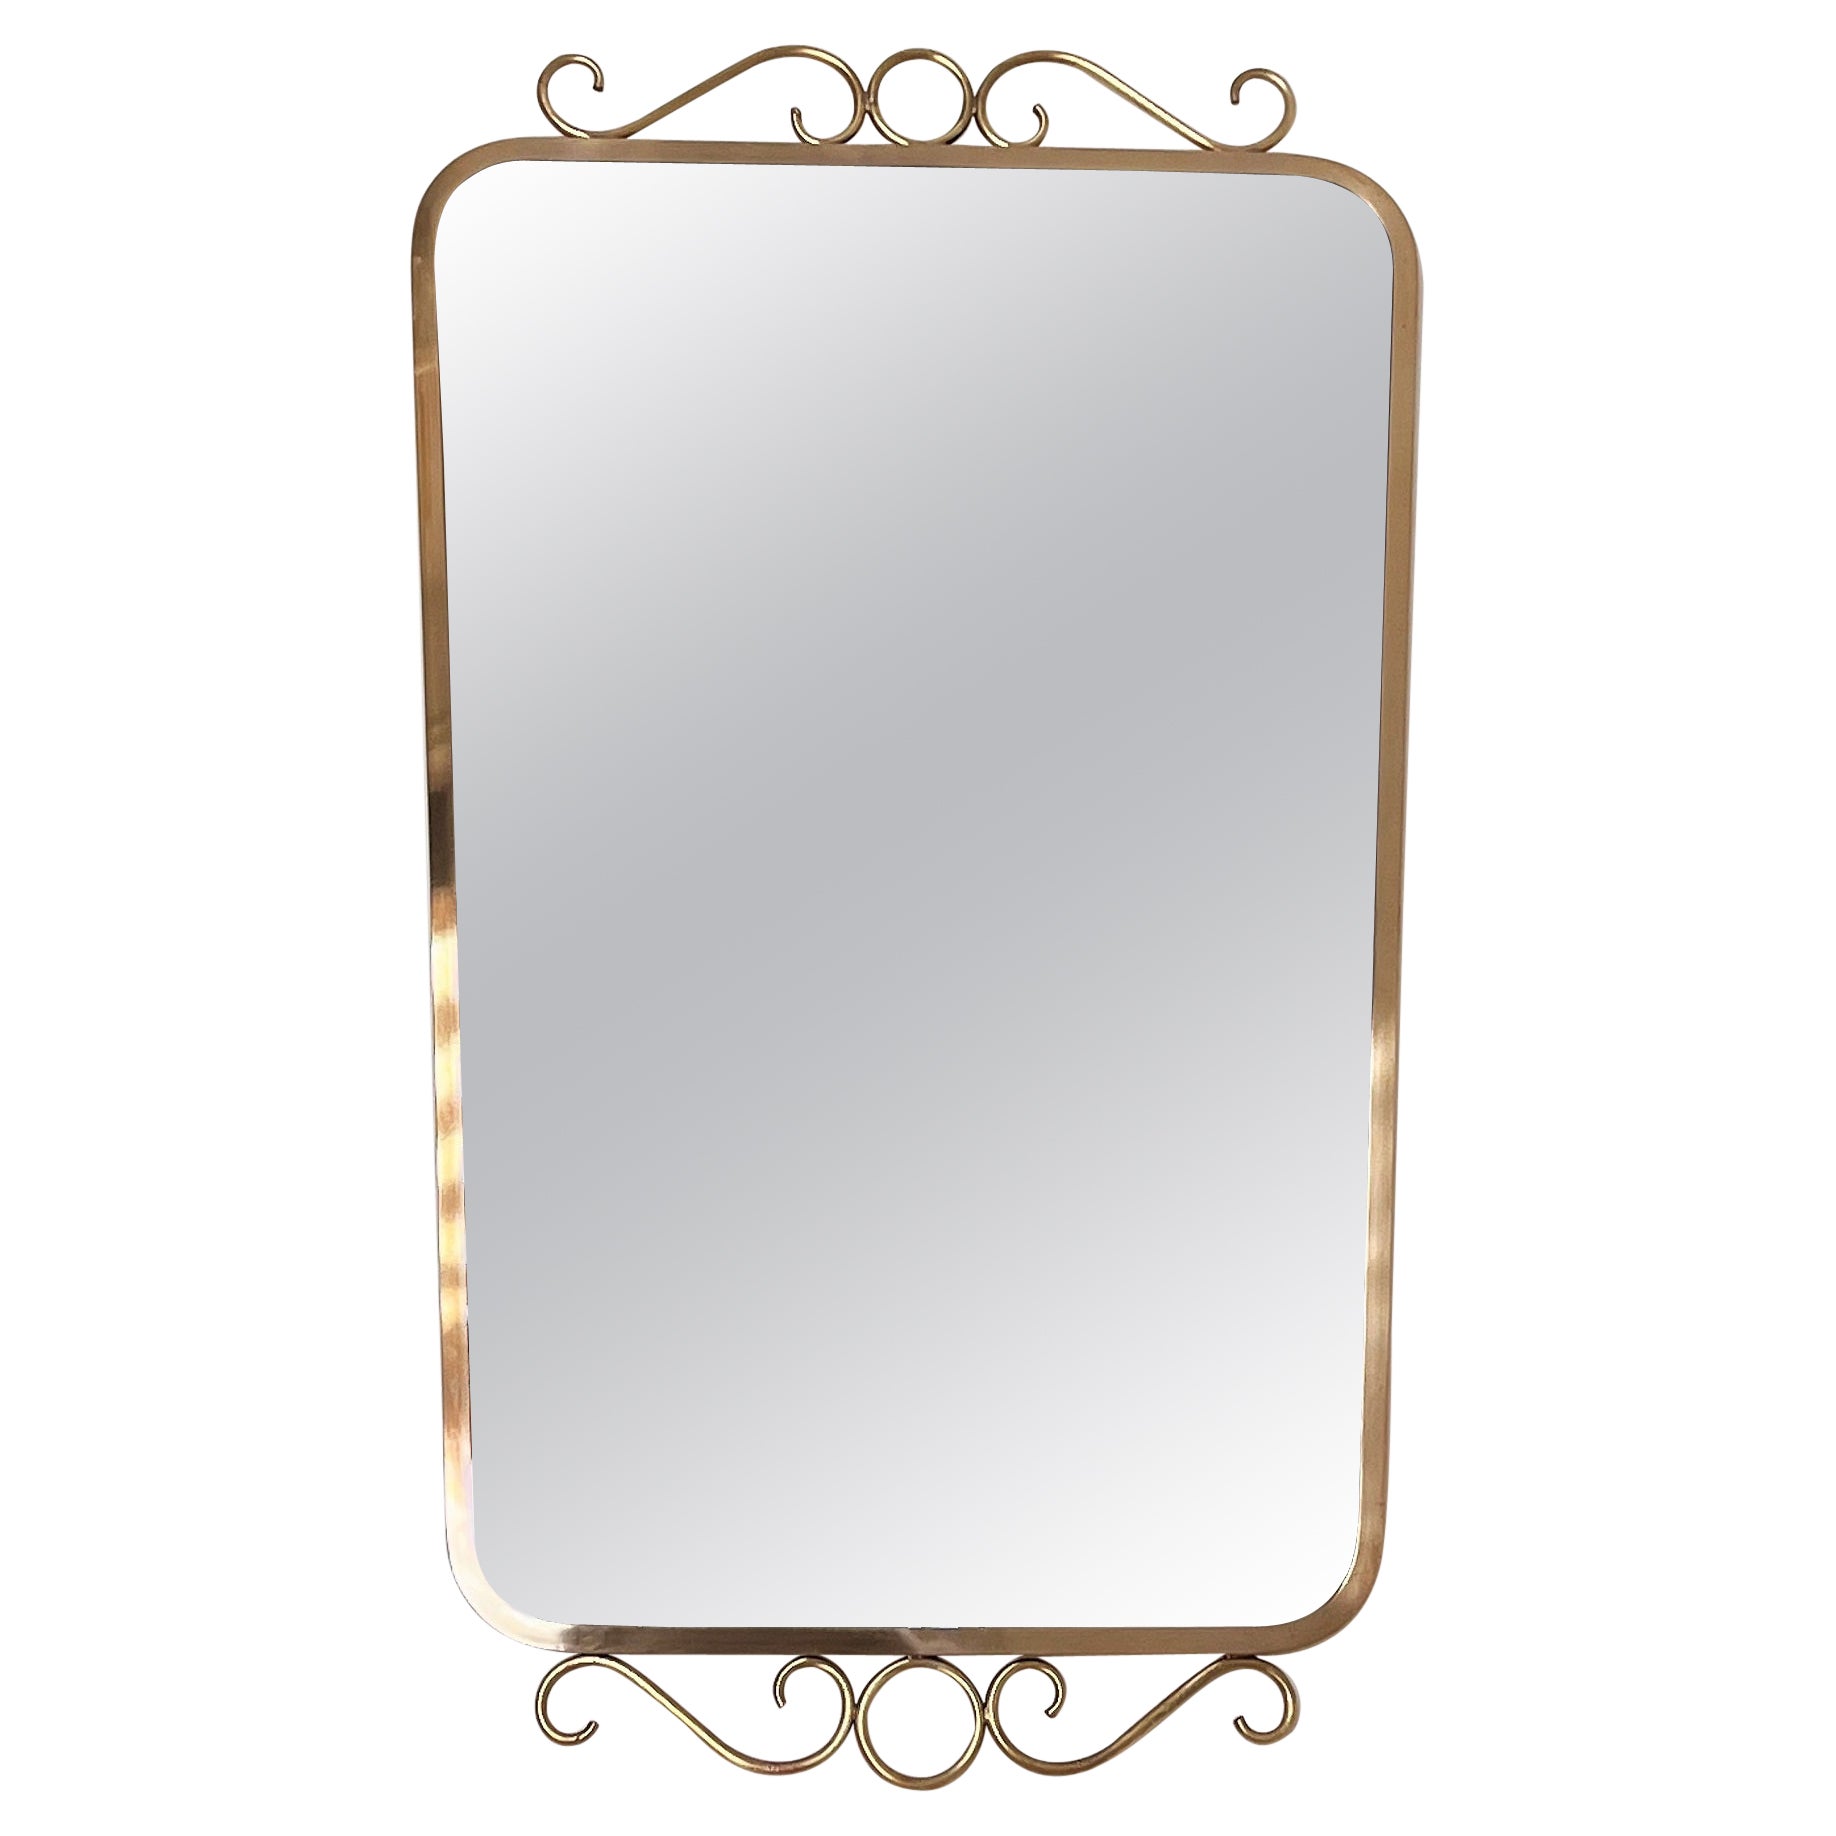 Italian Mid-Century Crystal and Brass Mirror with Decoration, 1950s